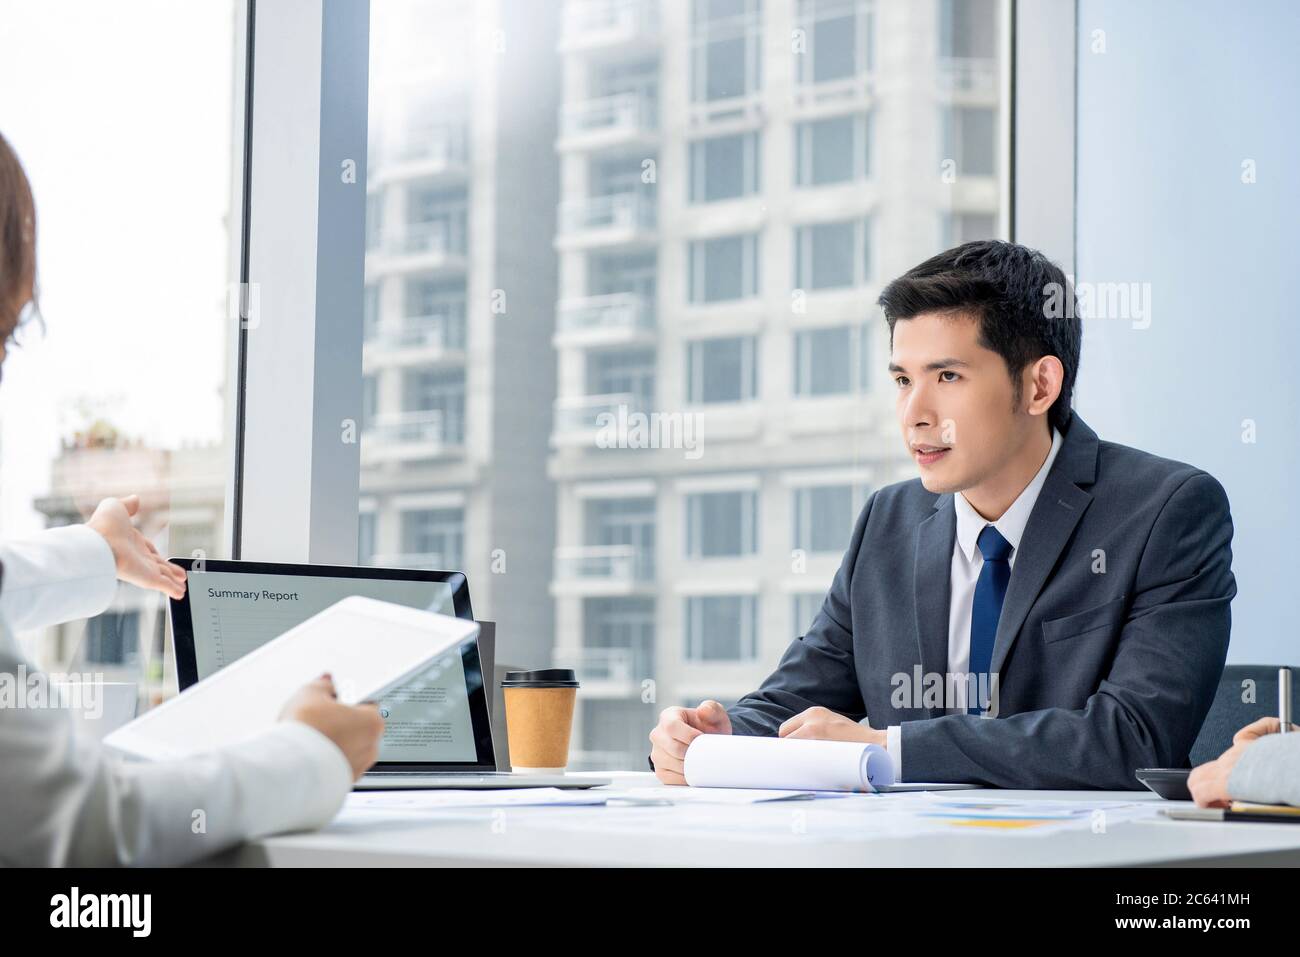 Handsome Asian businessman listening to presentation at the meeting city office Stock Photo